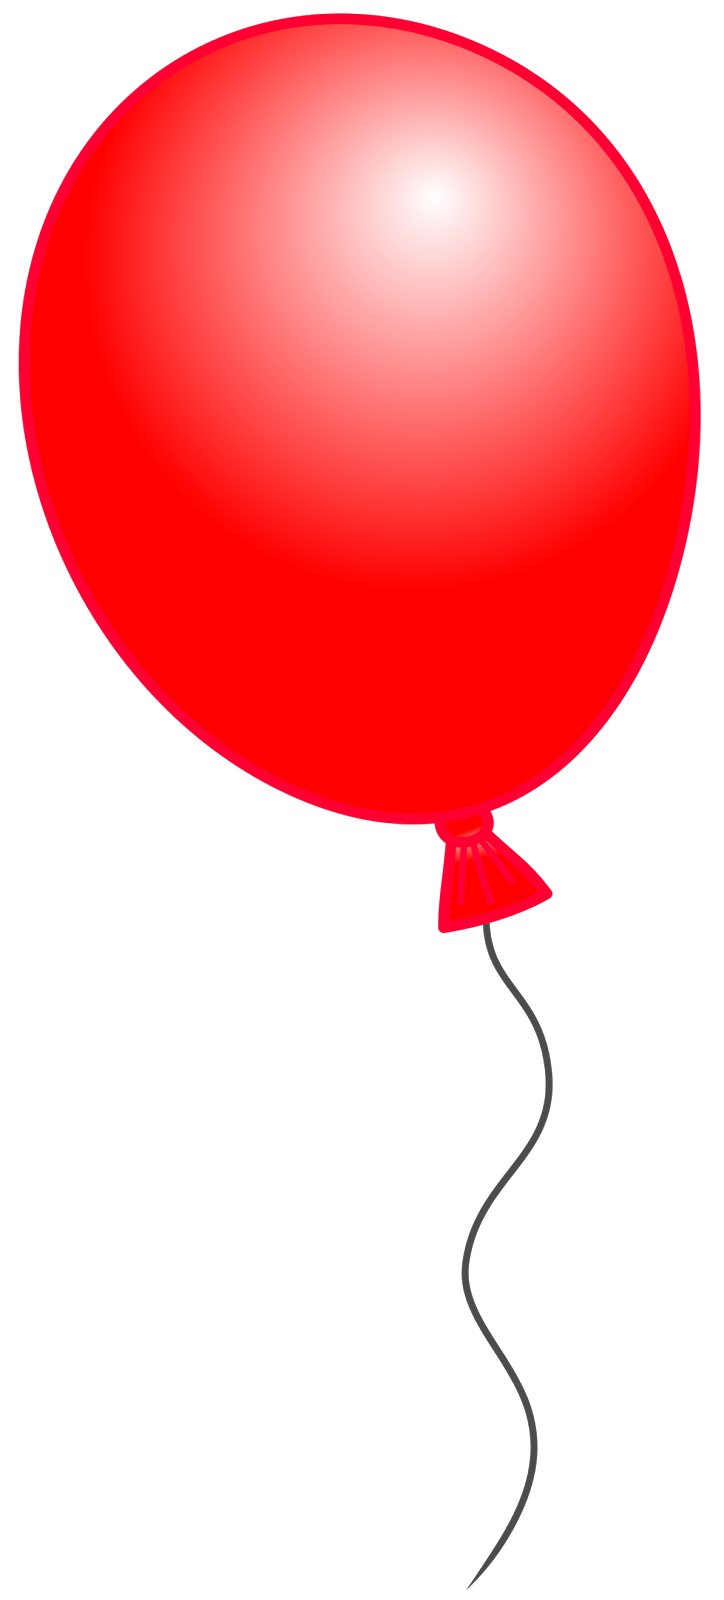 Free Balloon Template Cliparts, Download Free Balloon Template Cliparts